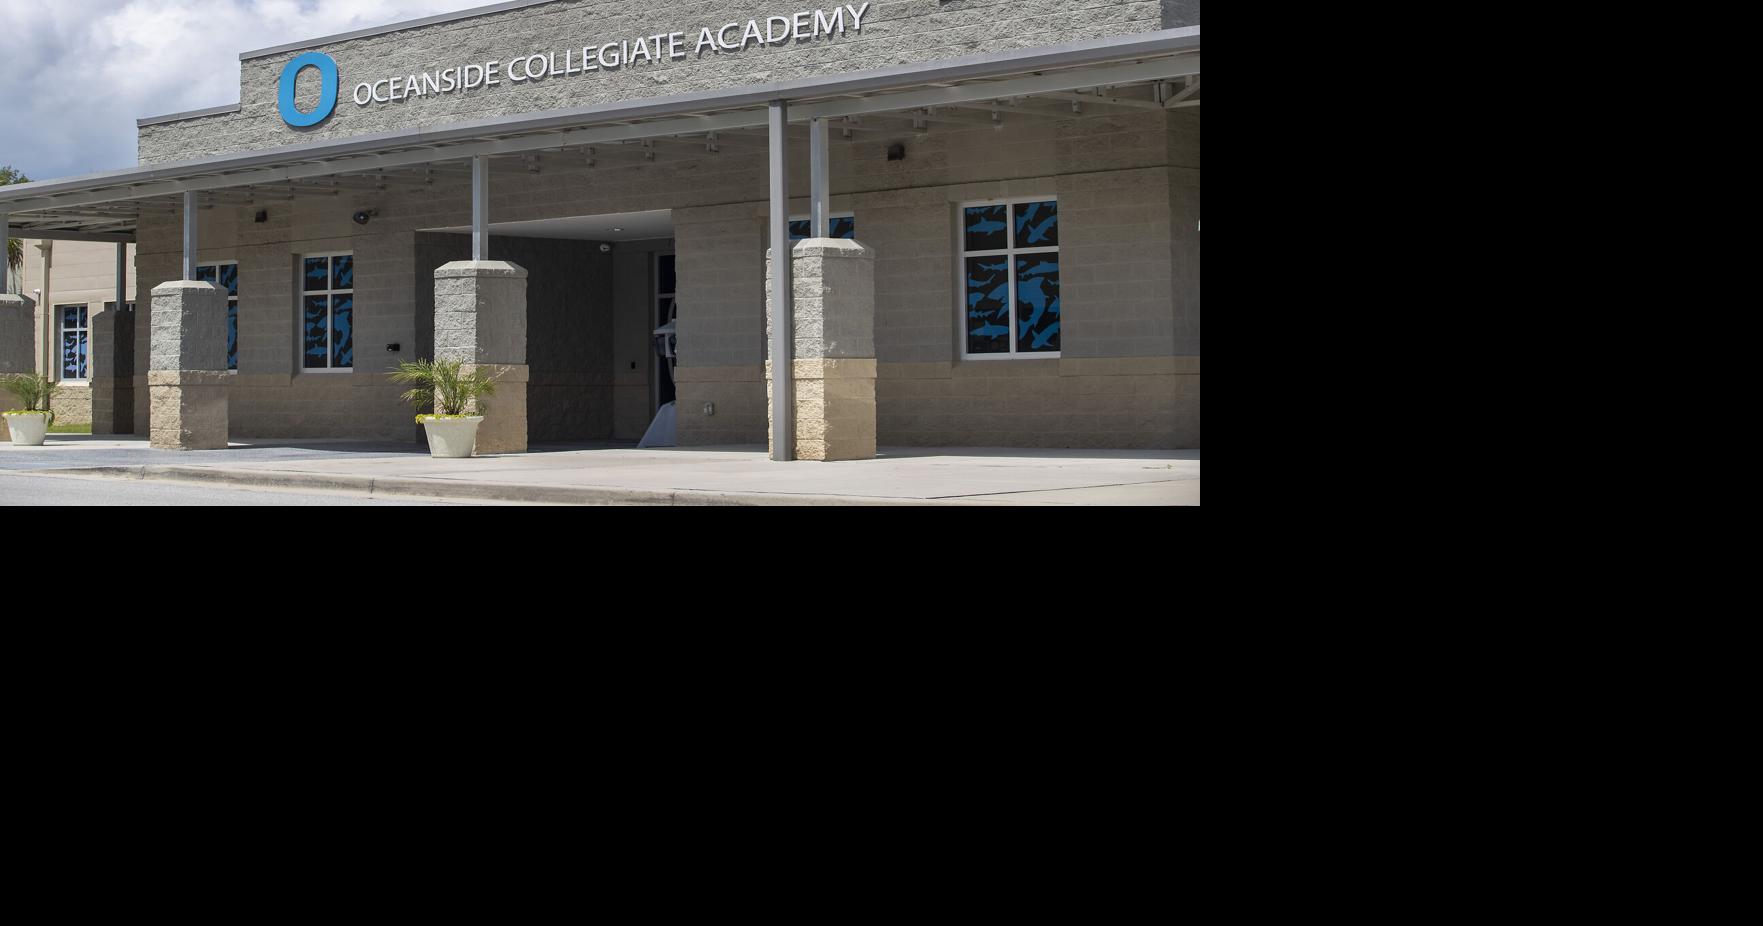 Oceanside Collegiate Academy potential transfer stuck in legal gray area Photo